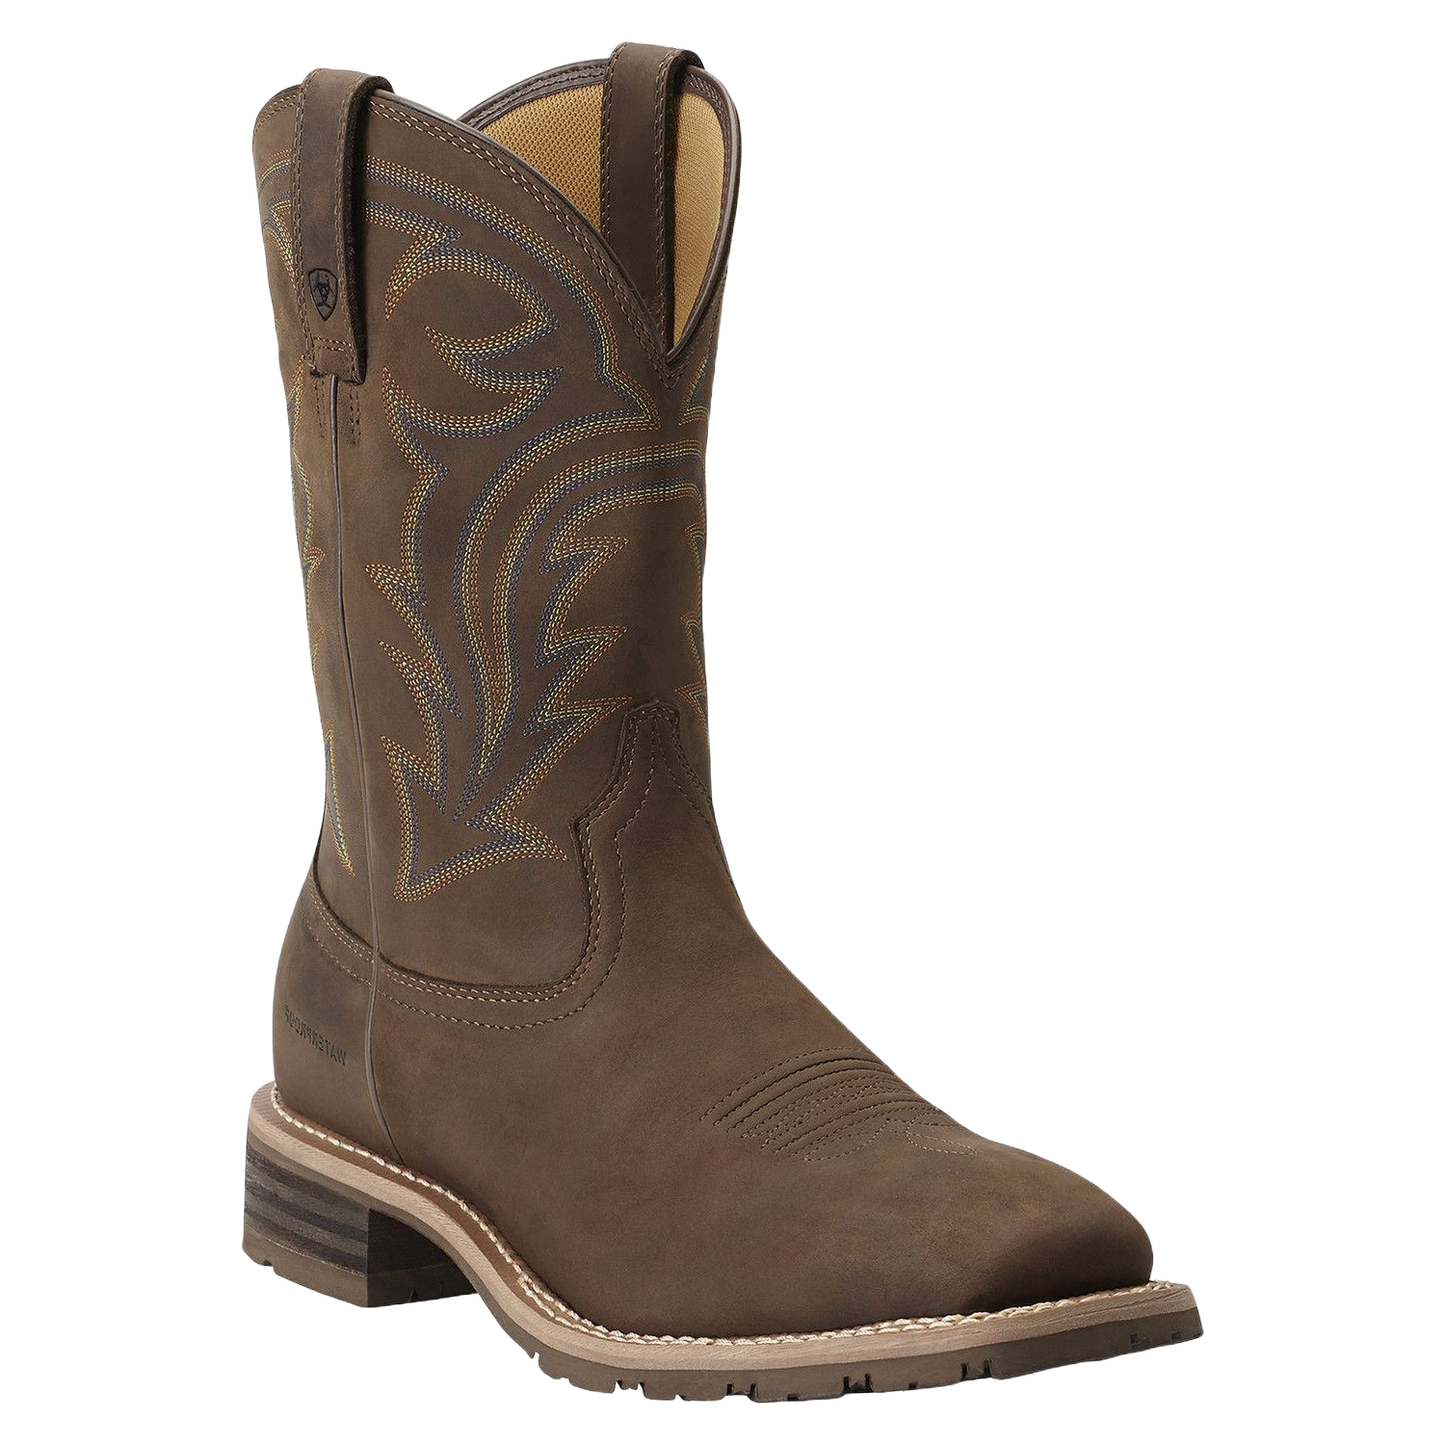 Ariat Men’s Brown Hybrid Rancher H2O Waterproof Pull-On Boot 10014067